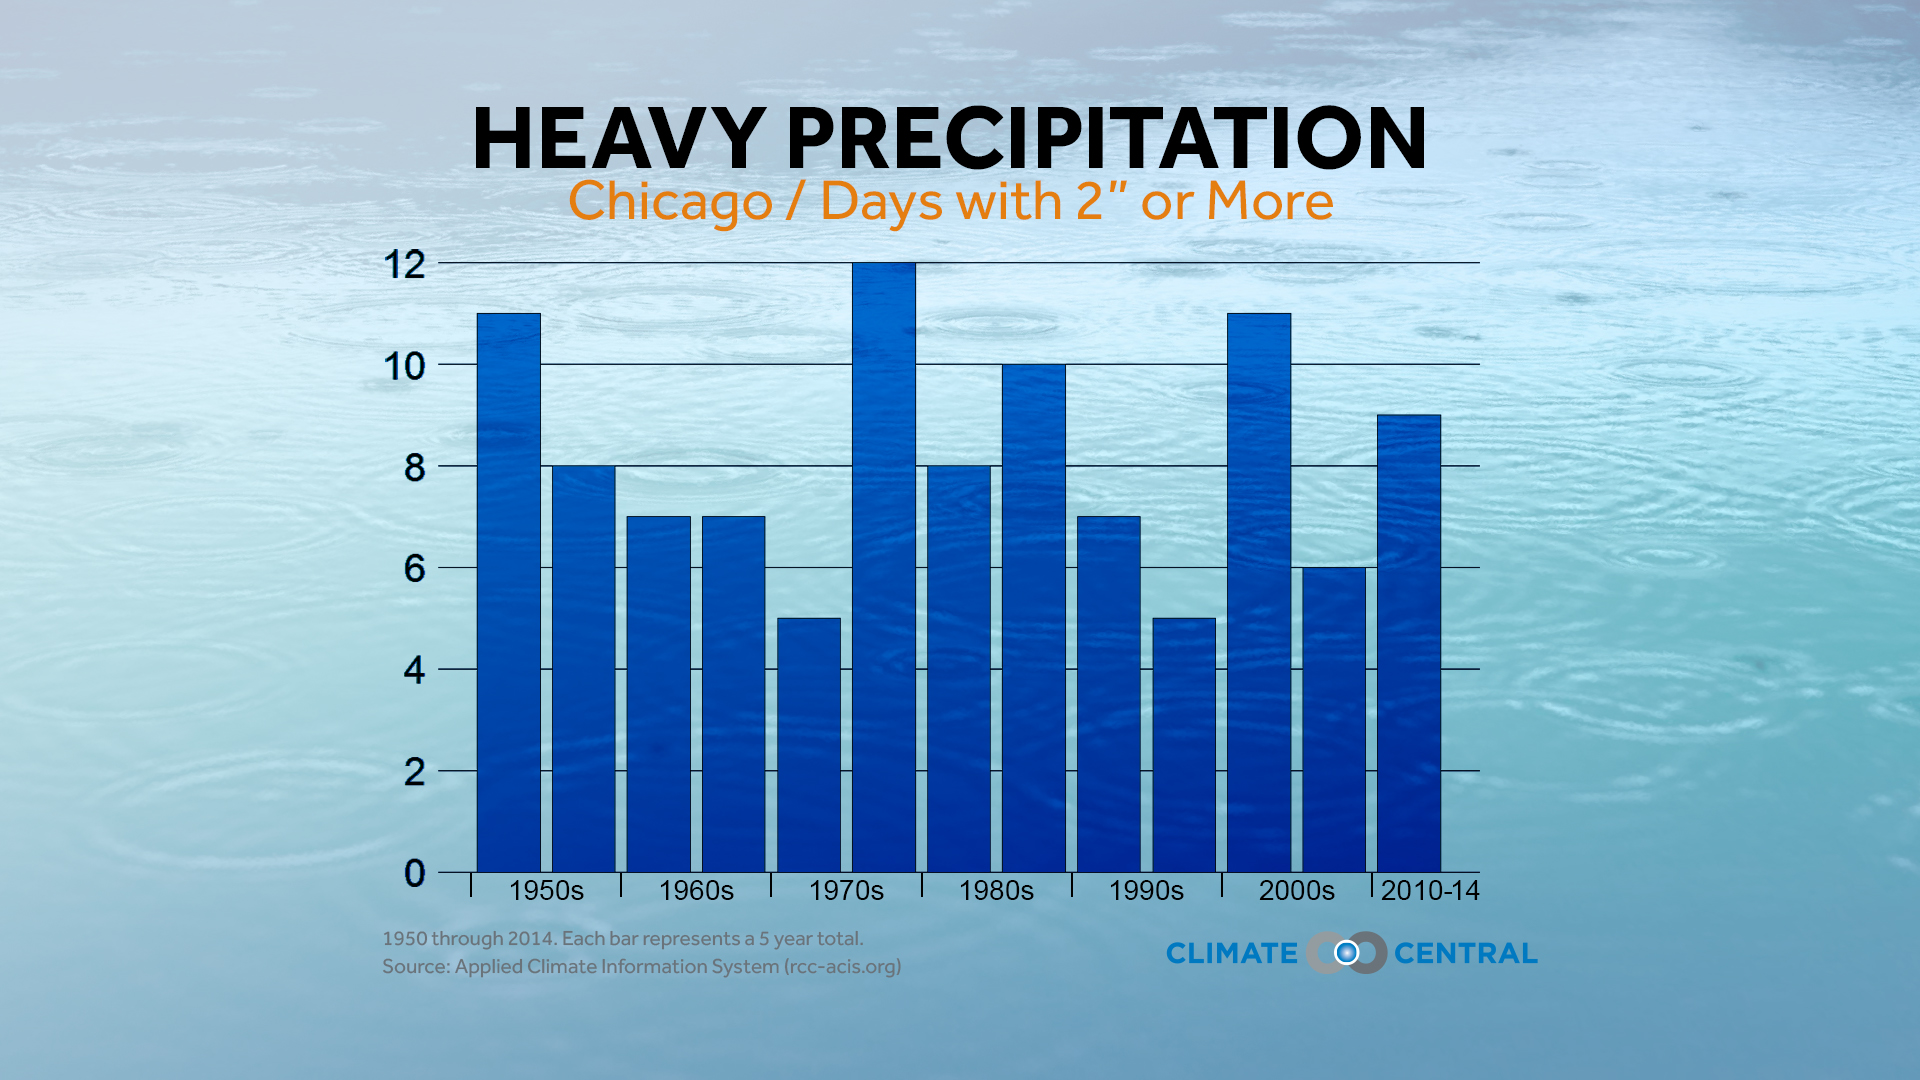 year to date precipitation totals